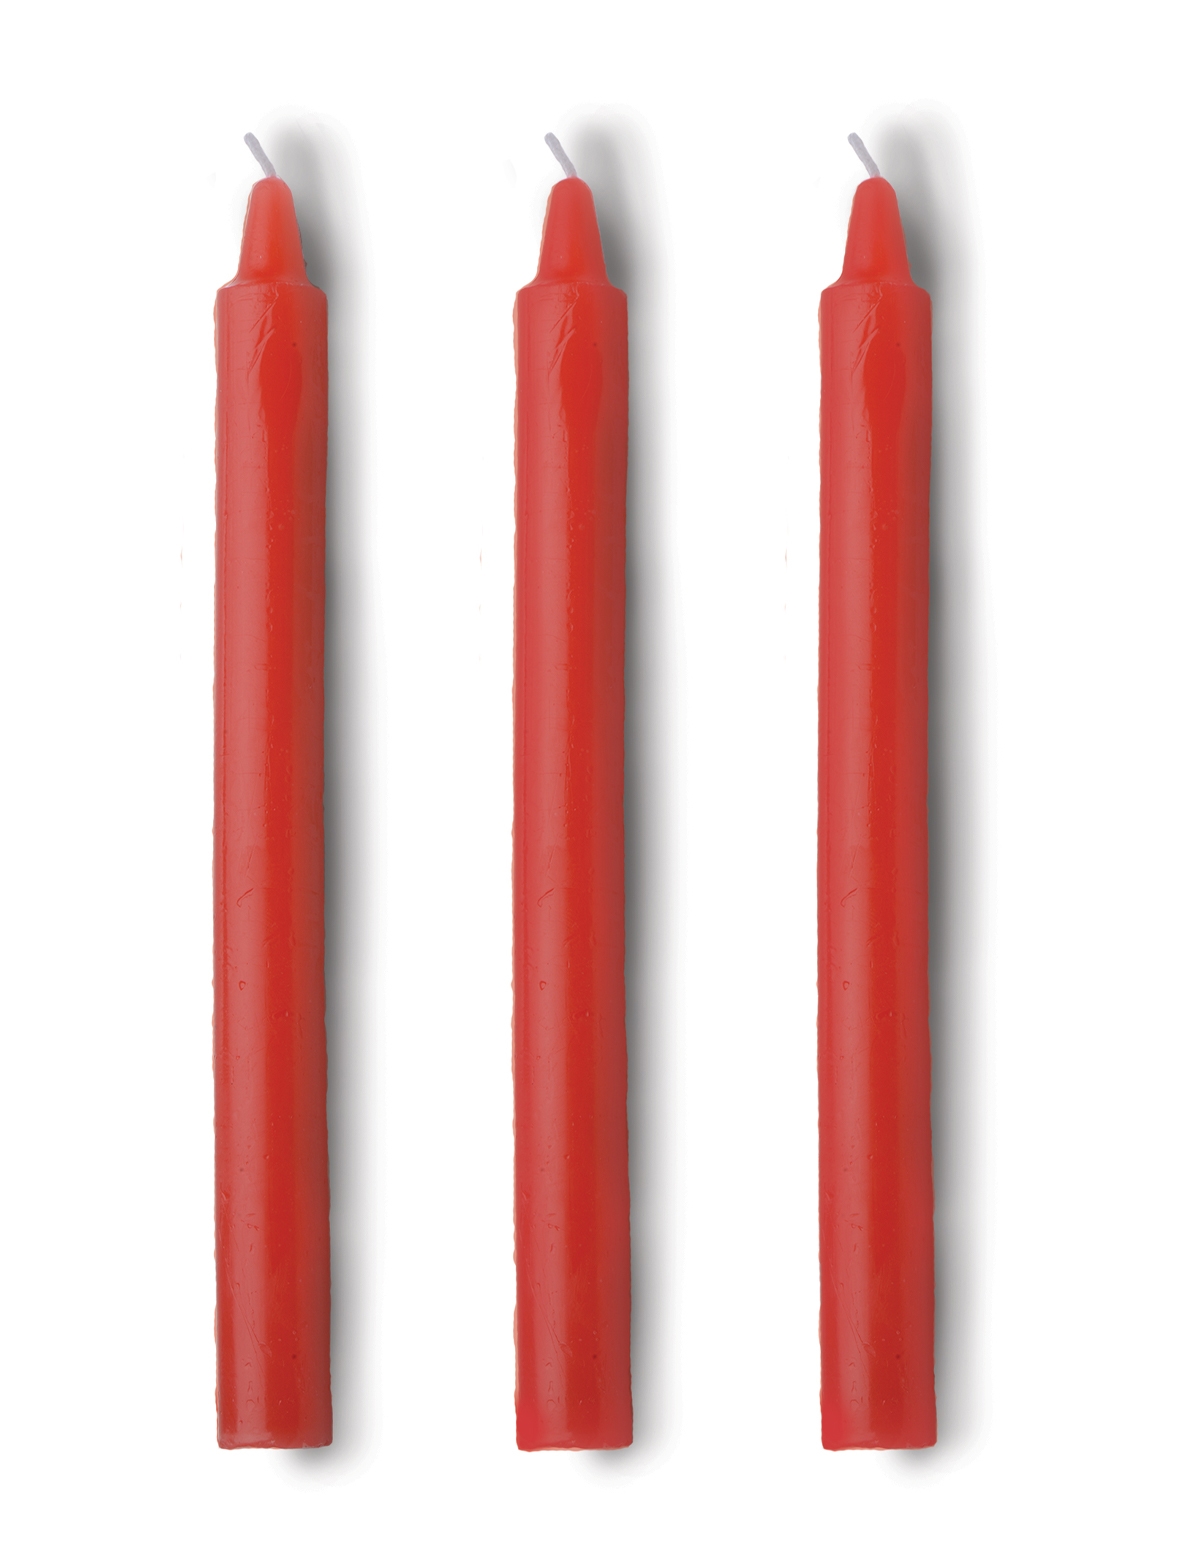 alternate image for Fire Sticks - Fetish Drip Candle Set Of 3